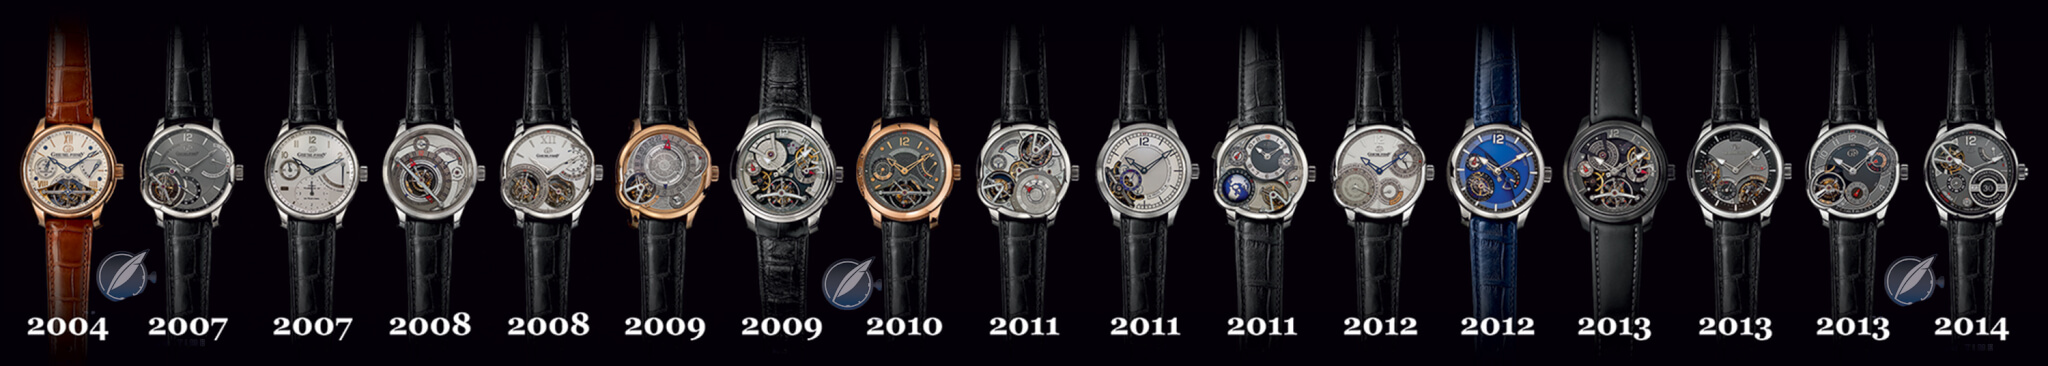 10 years of timepieces by Greubel Forsey